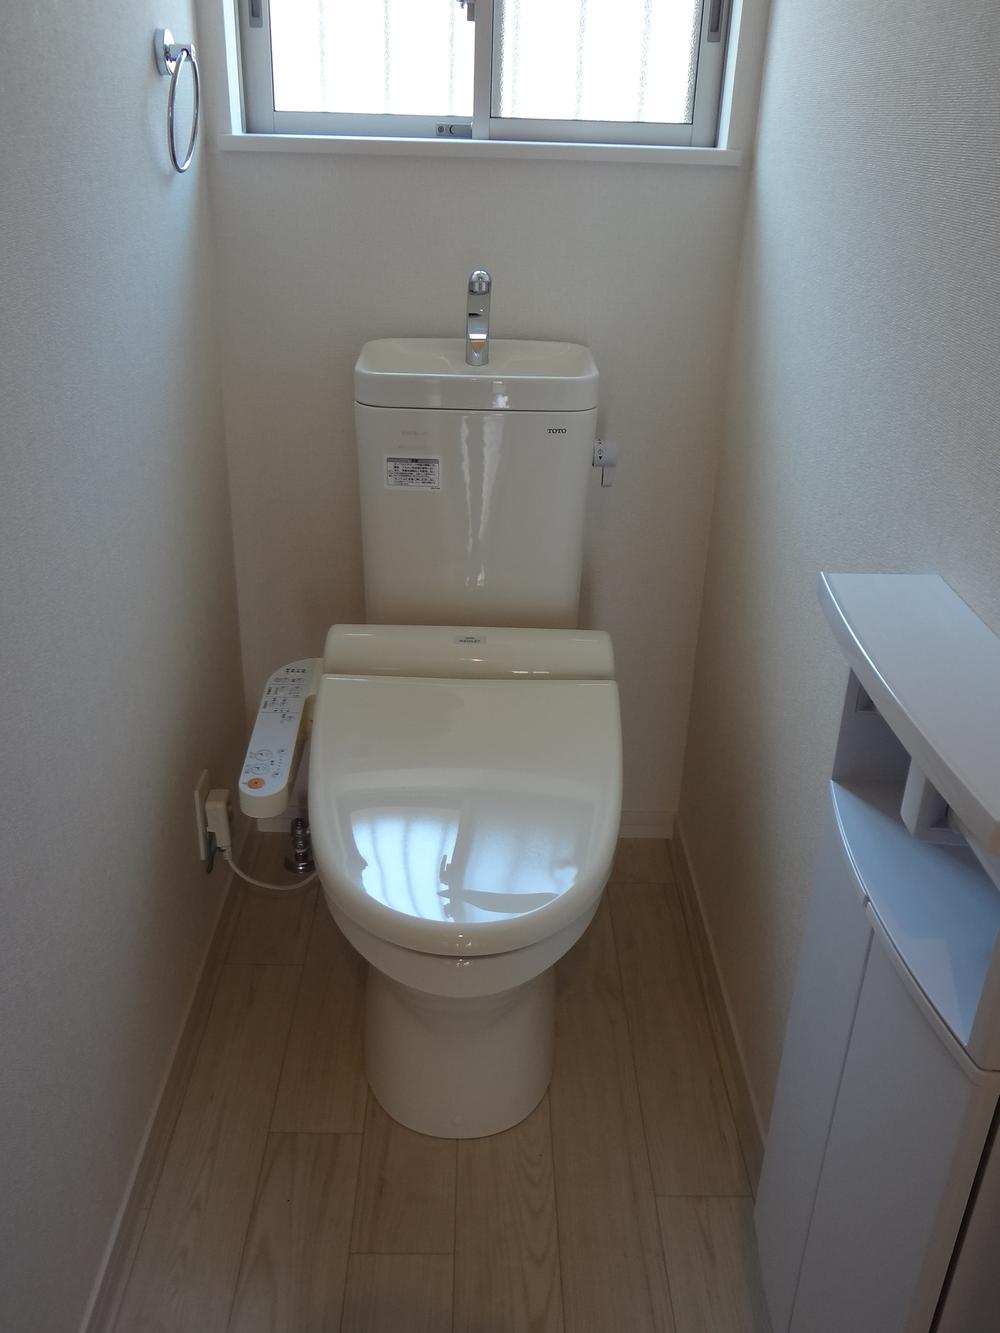 Toilet. There is a storage box with paper holder